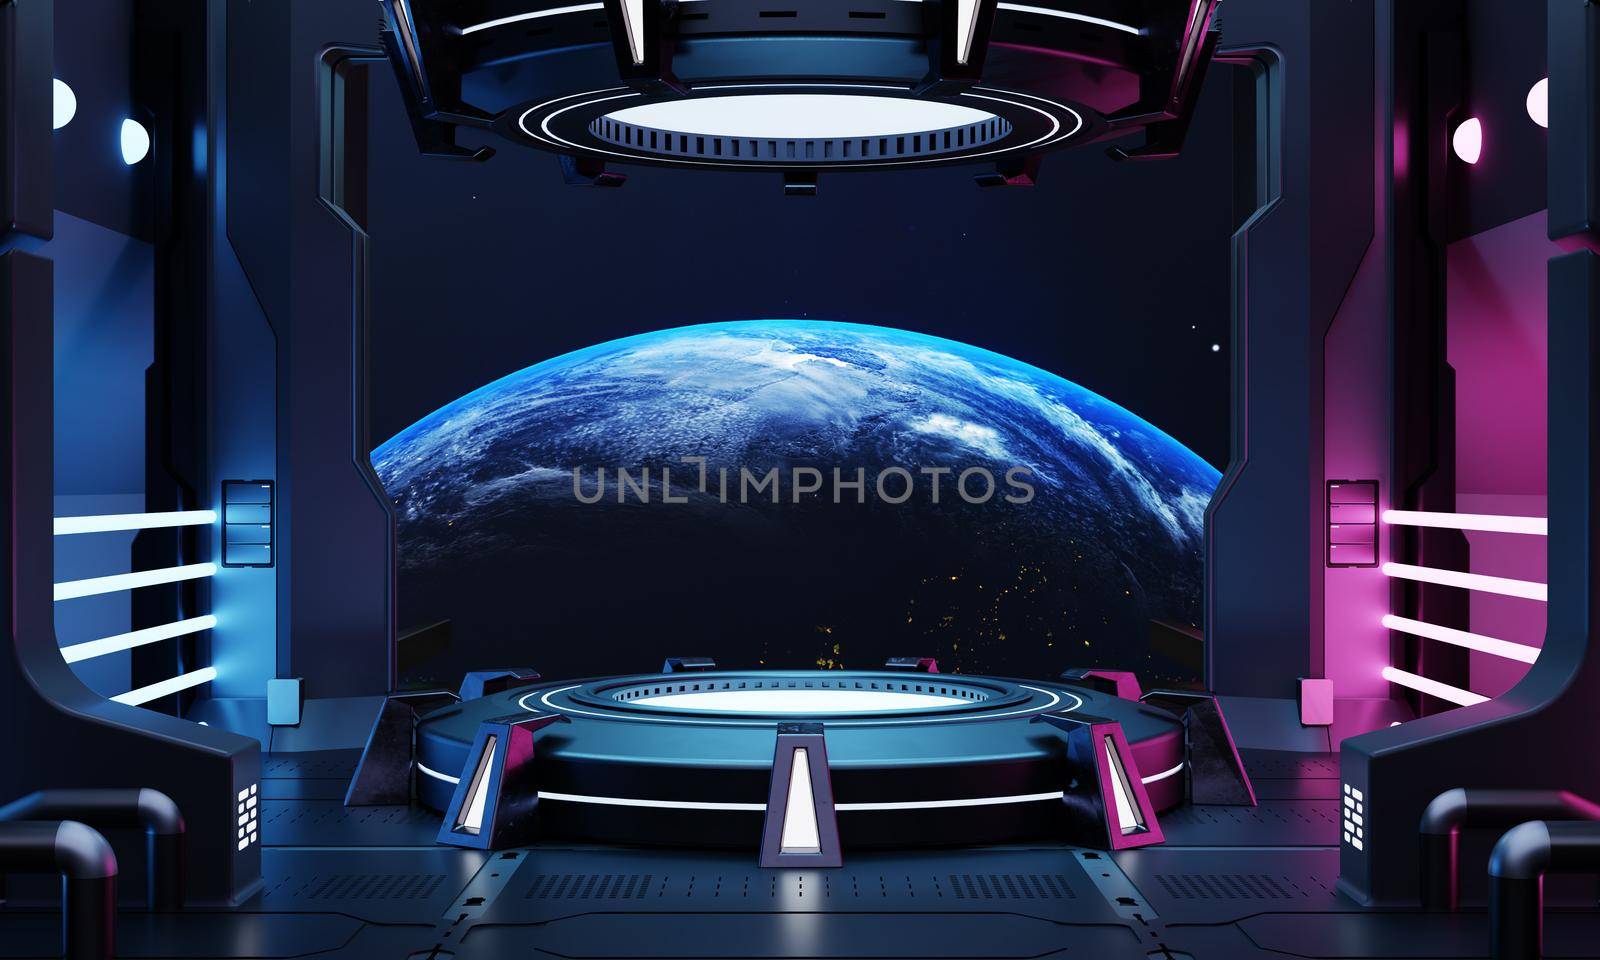 Sci-fi product podium showcase in empty spaceship room with blue earth background. Cyberpunk blue and pink color neon space technology and entertainment object concept. 3D illustration rendering